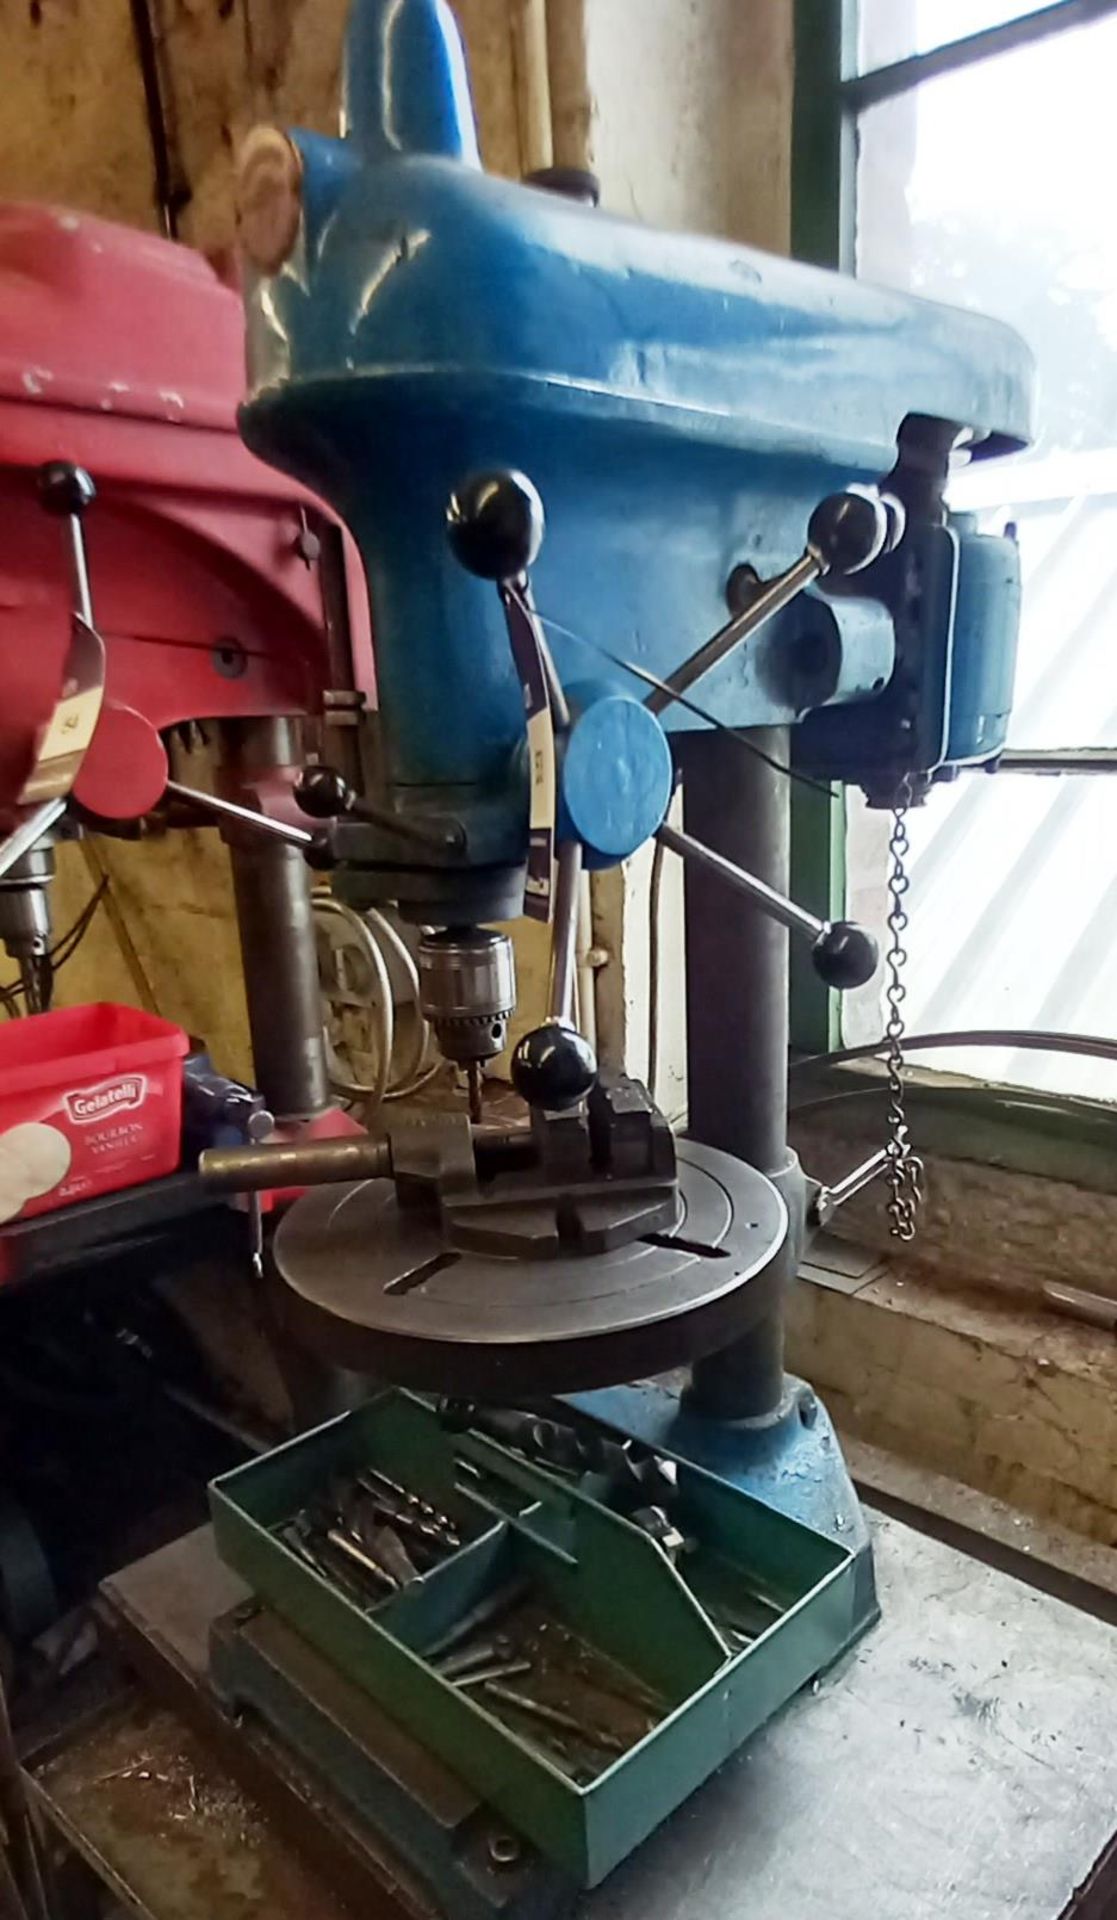 Kerry Drillmaster Pedestal Drill with Rise and Fall Table, Machine Vice and Various Drill Bits - Image 2 of 2